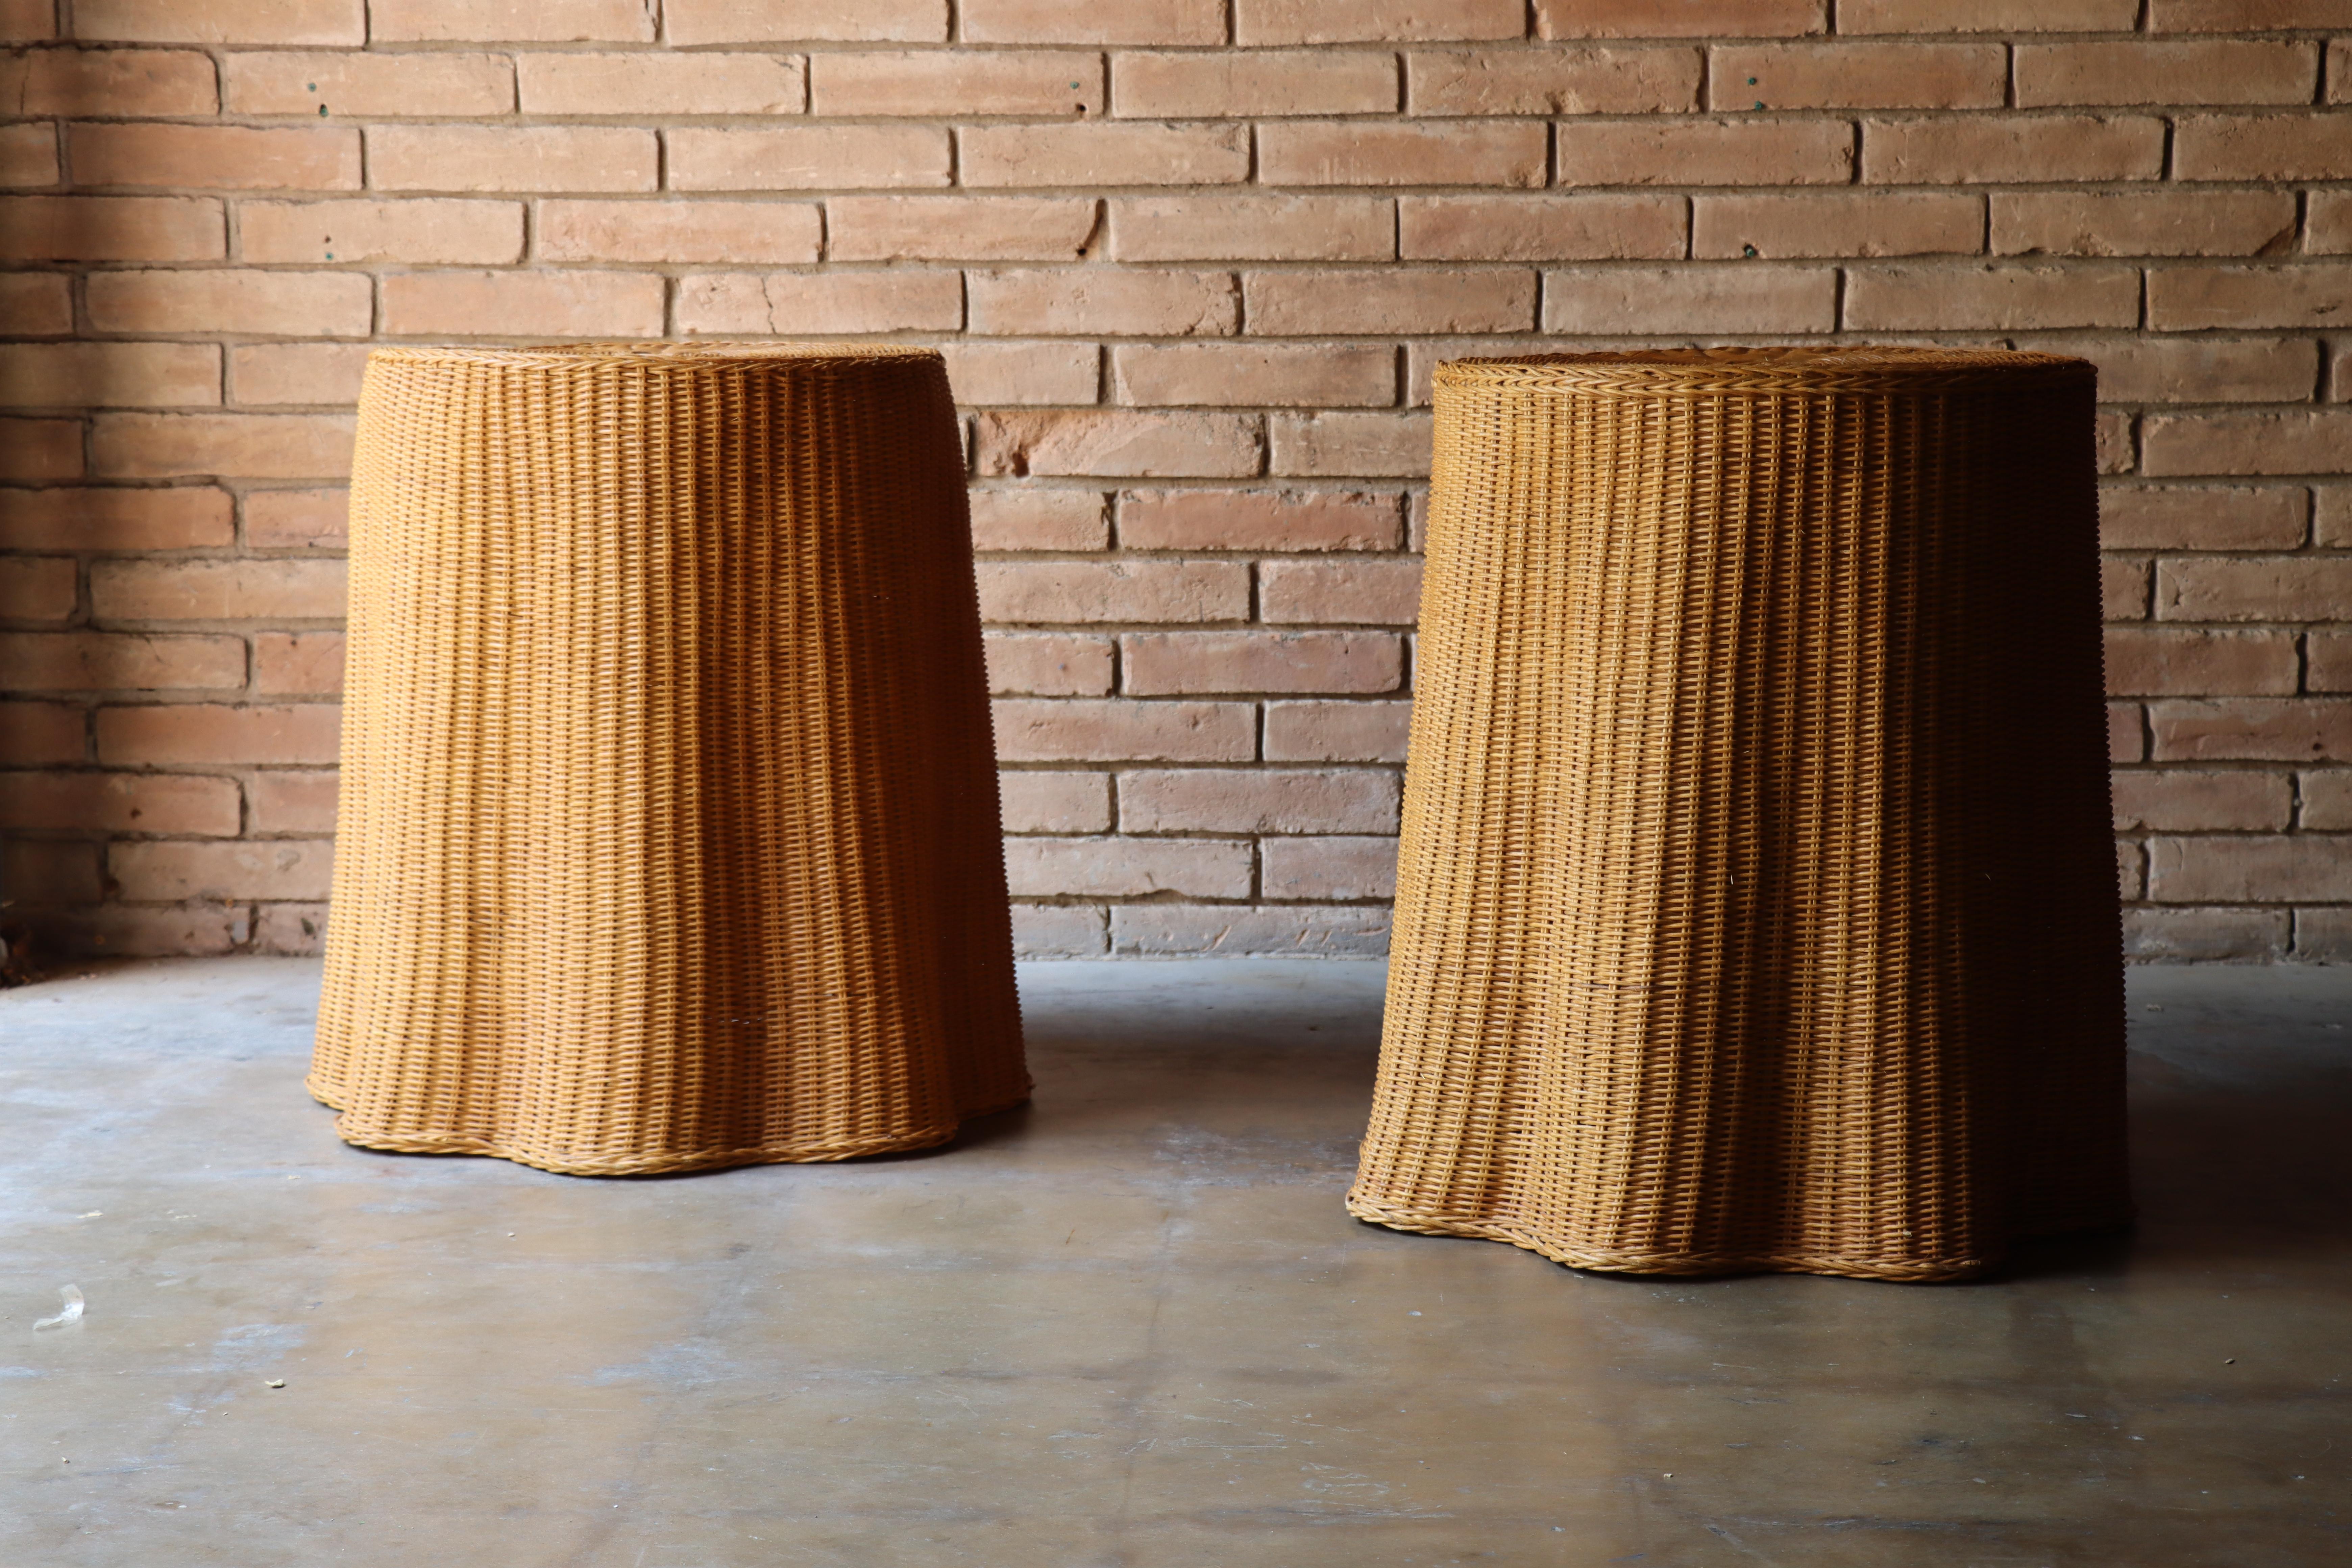 Rare pair of vintage organic trompe l’oeil wicker side tables or stands. These examples have a lovely draped illusion adding to their sophistication yet playfulness form. The vintage rattan has a rich warm coloring only age can produce. 

Would be